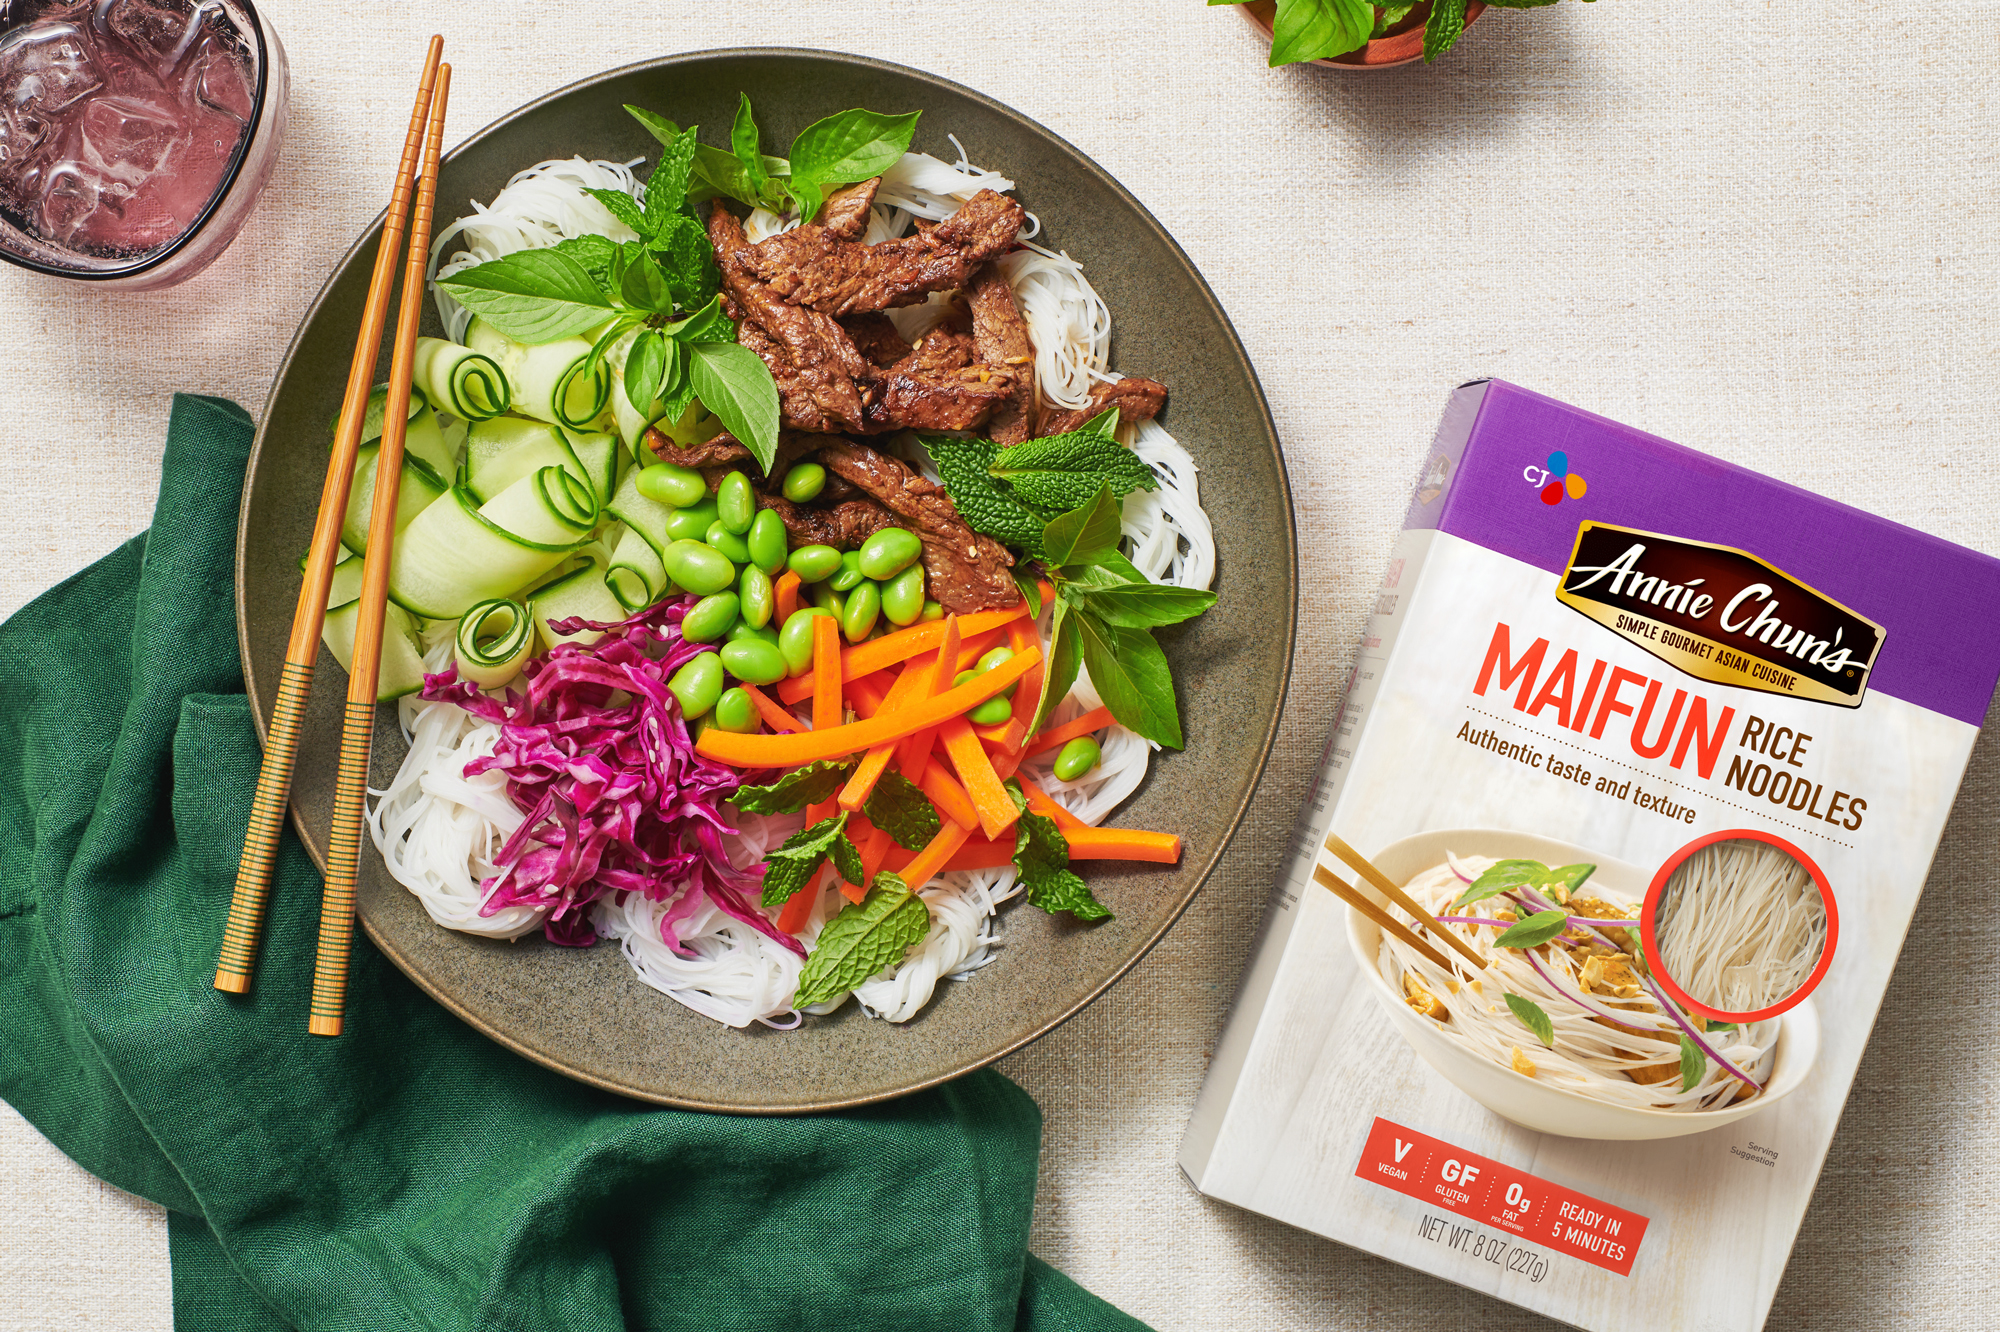 Food styling and recipe development for Maifun rice noodles packaging design shot from above on table.